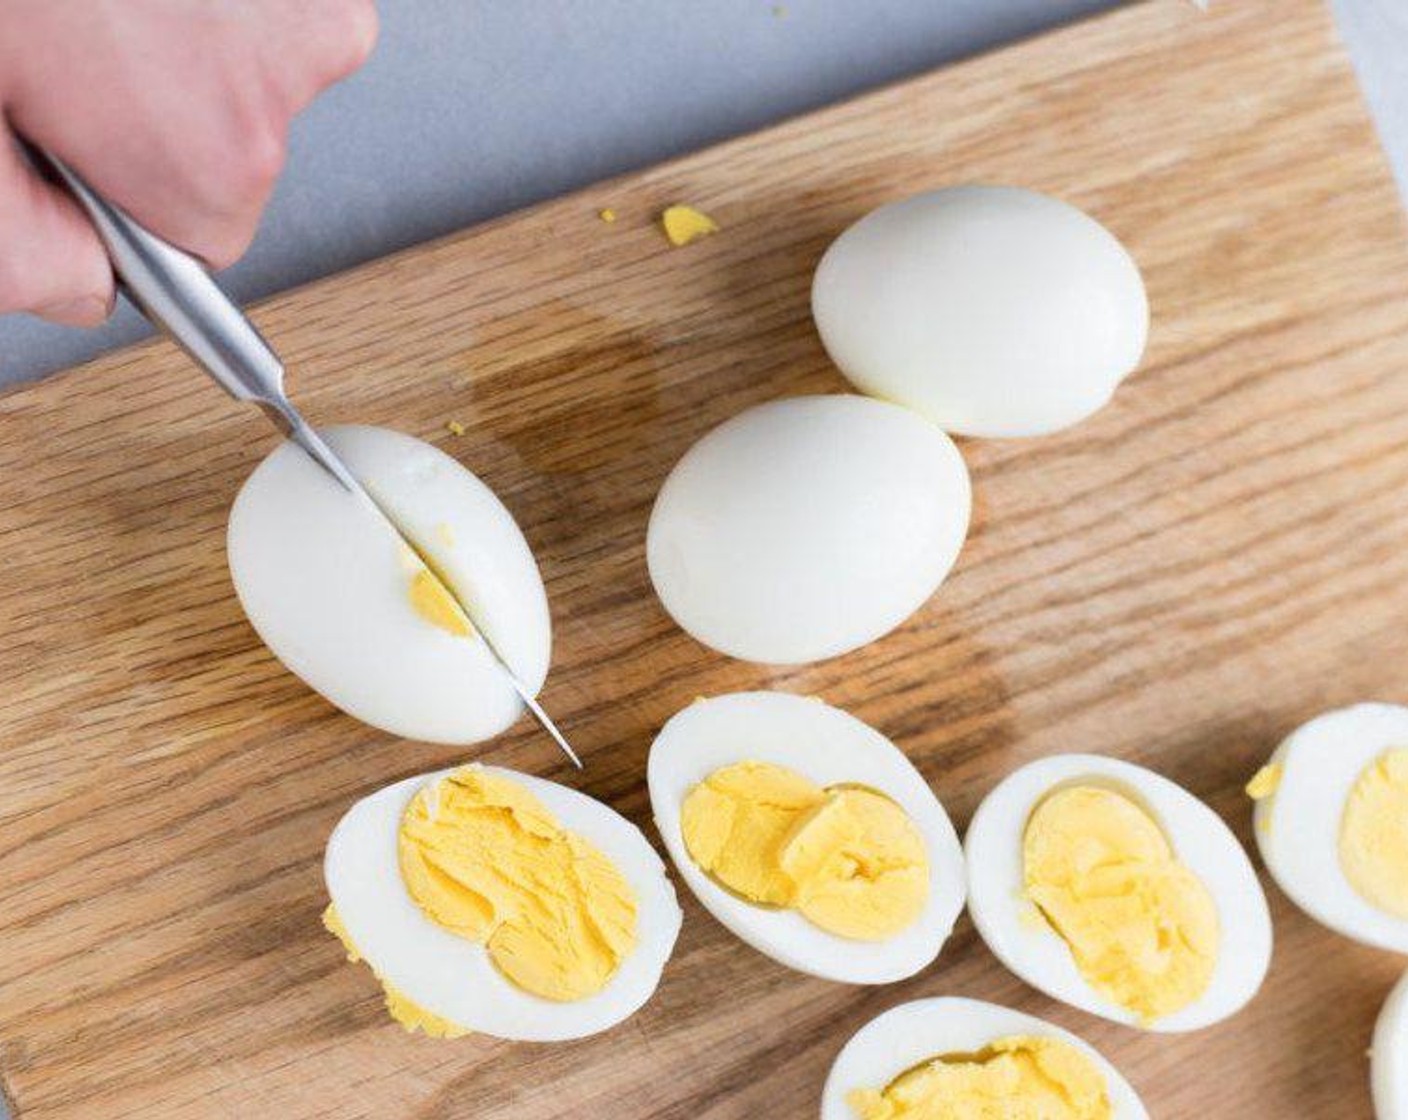 step 4 Cut eggs in half, putting yellow yolks into a medium-sized mixing bowl. Put egg whites to the side for filling later.